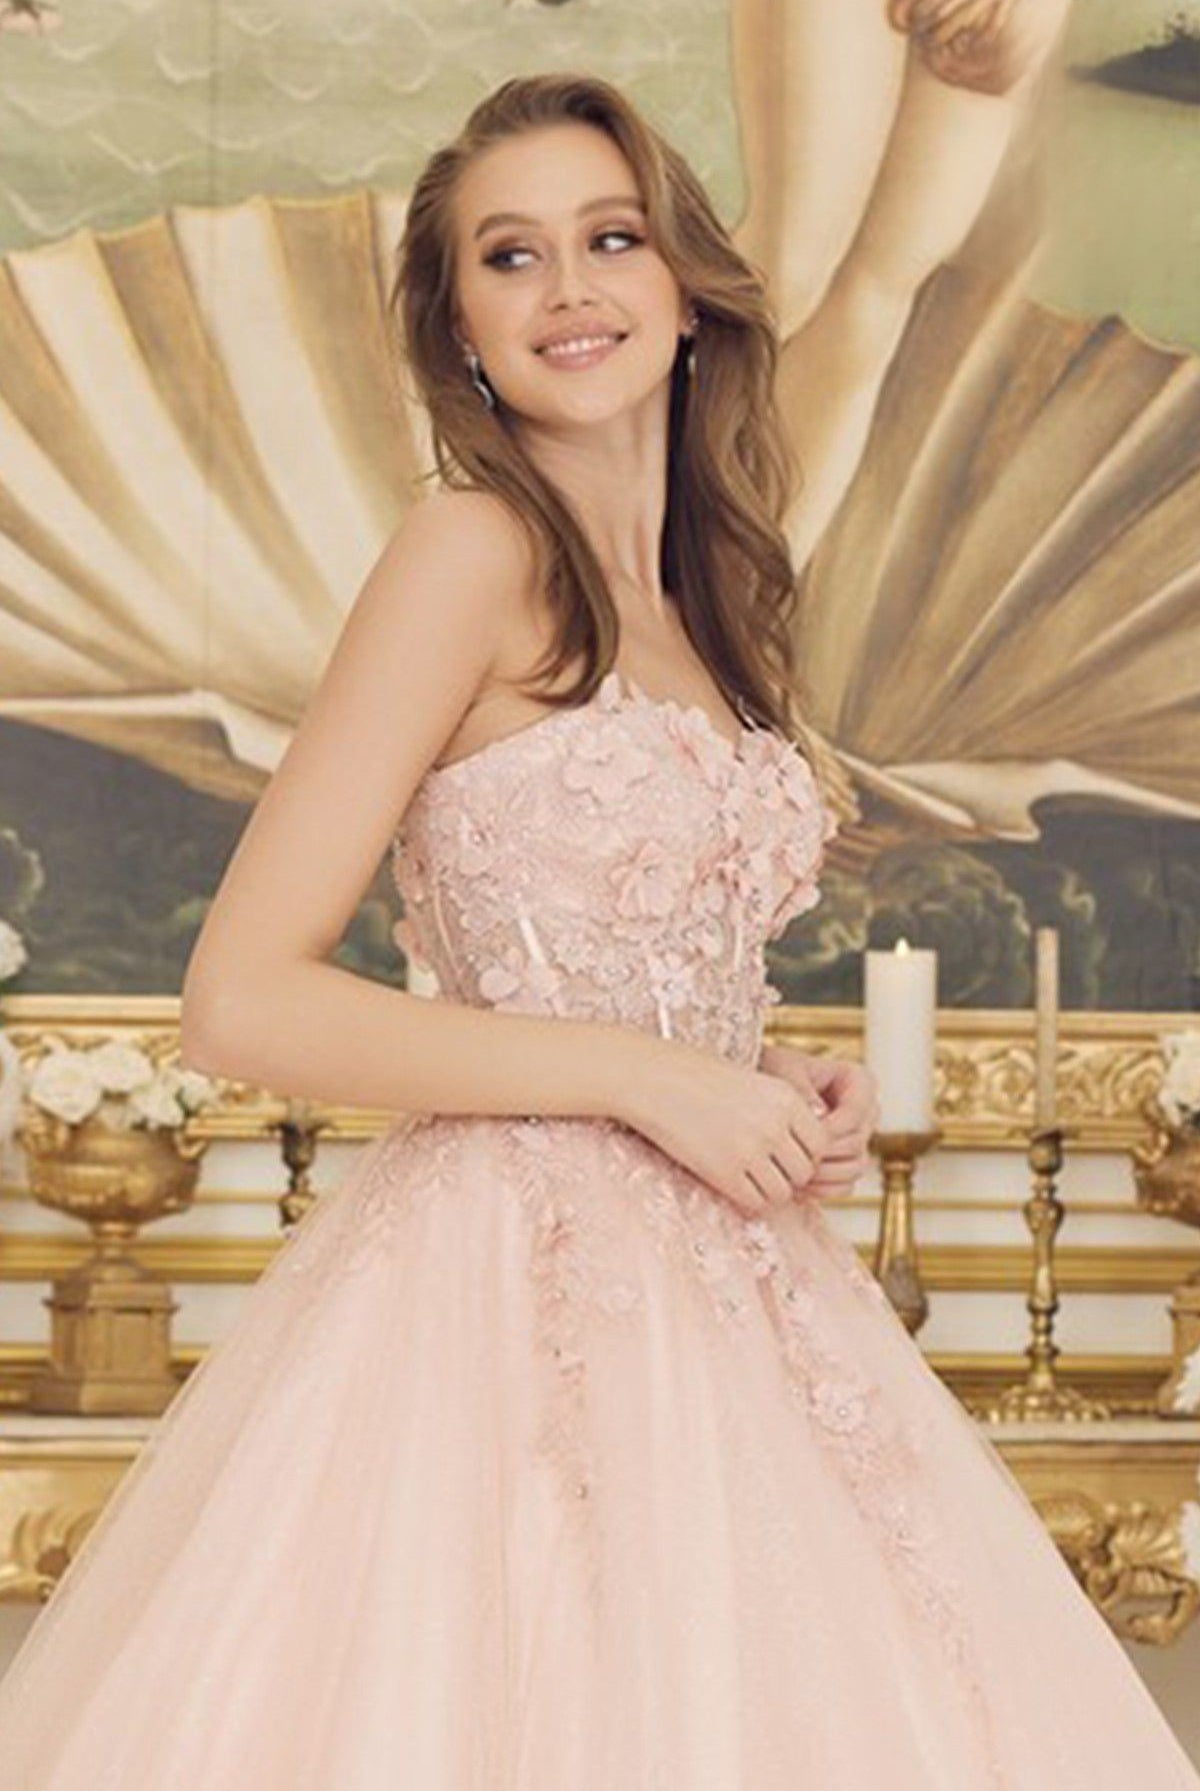 3D Floral Strapless Sweetheart Bodice Long Quinceanera Dress NXCU1192-Quiinceanera Dress-smcfashion.com